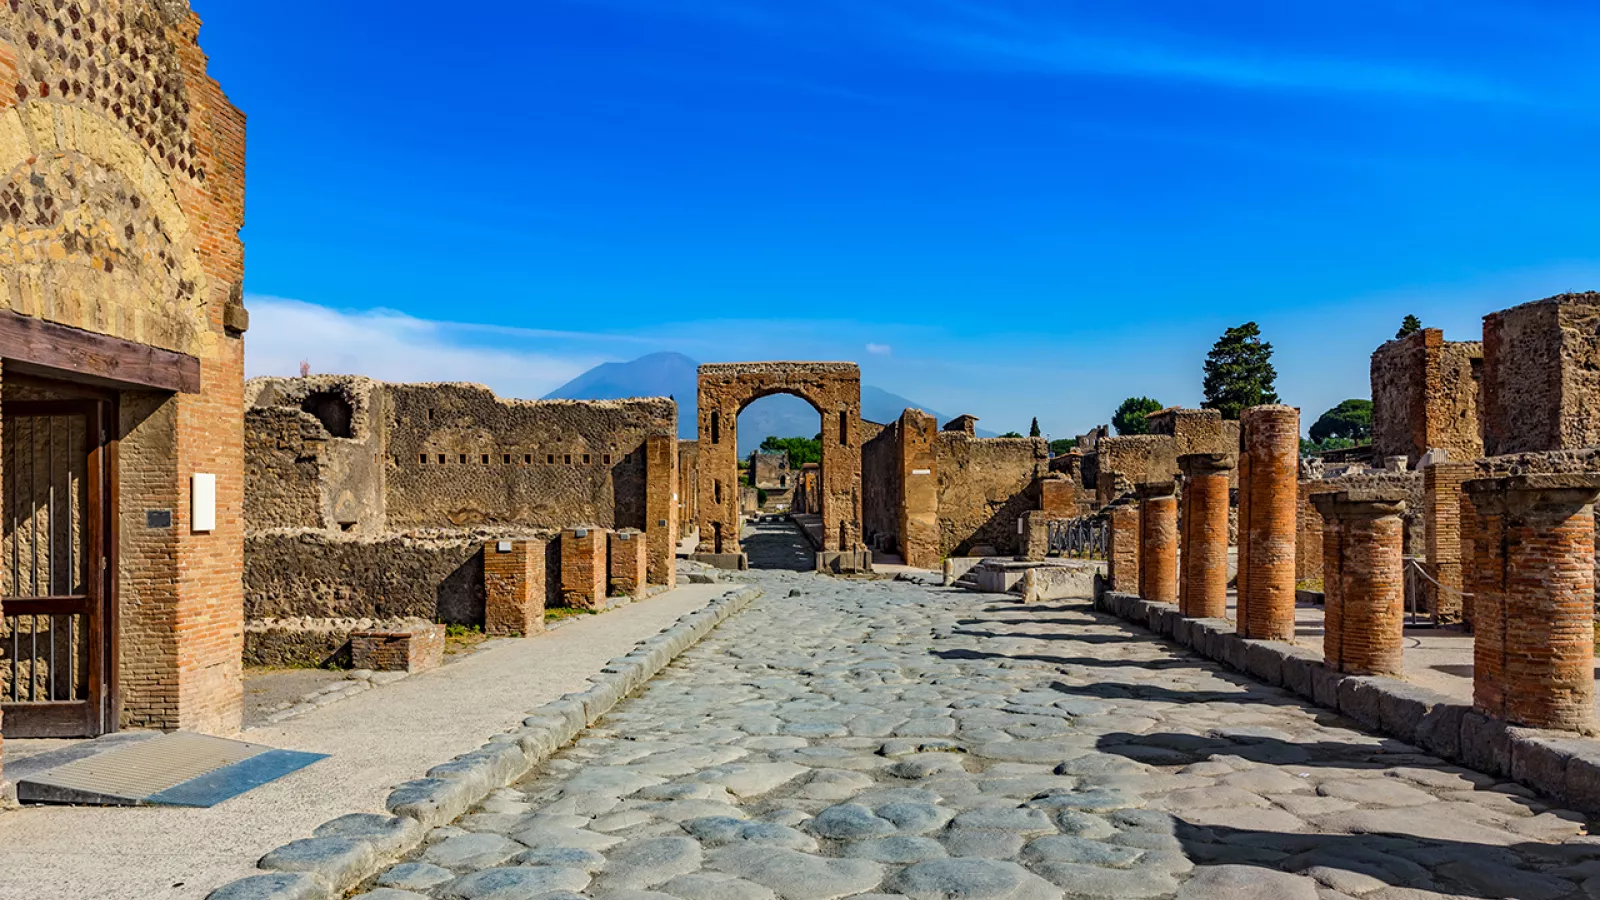 Archaeological sites in Italy